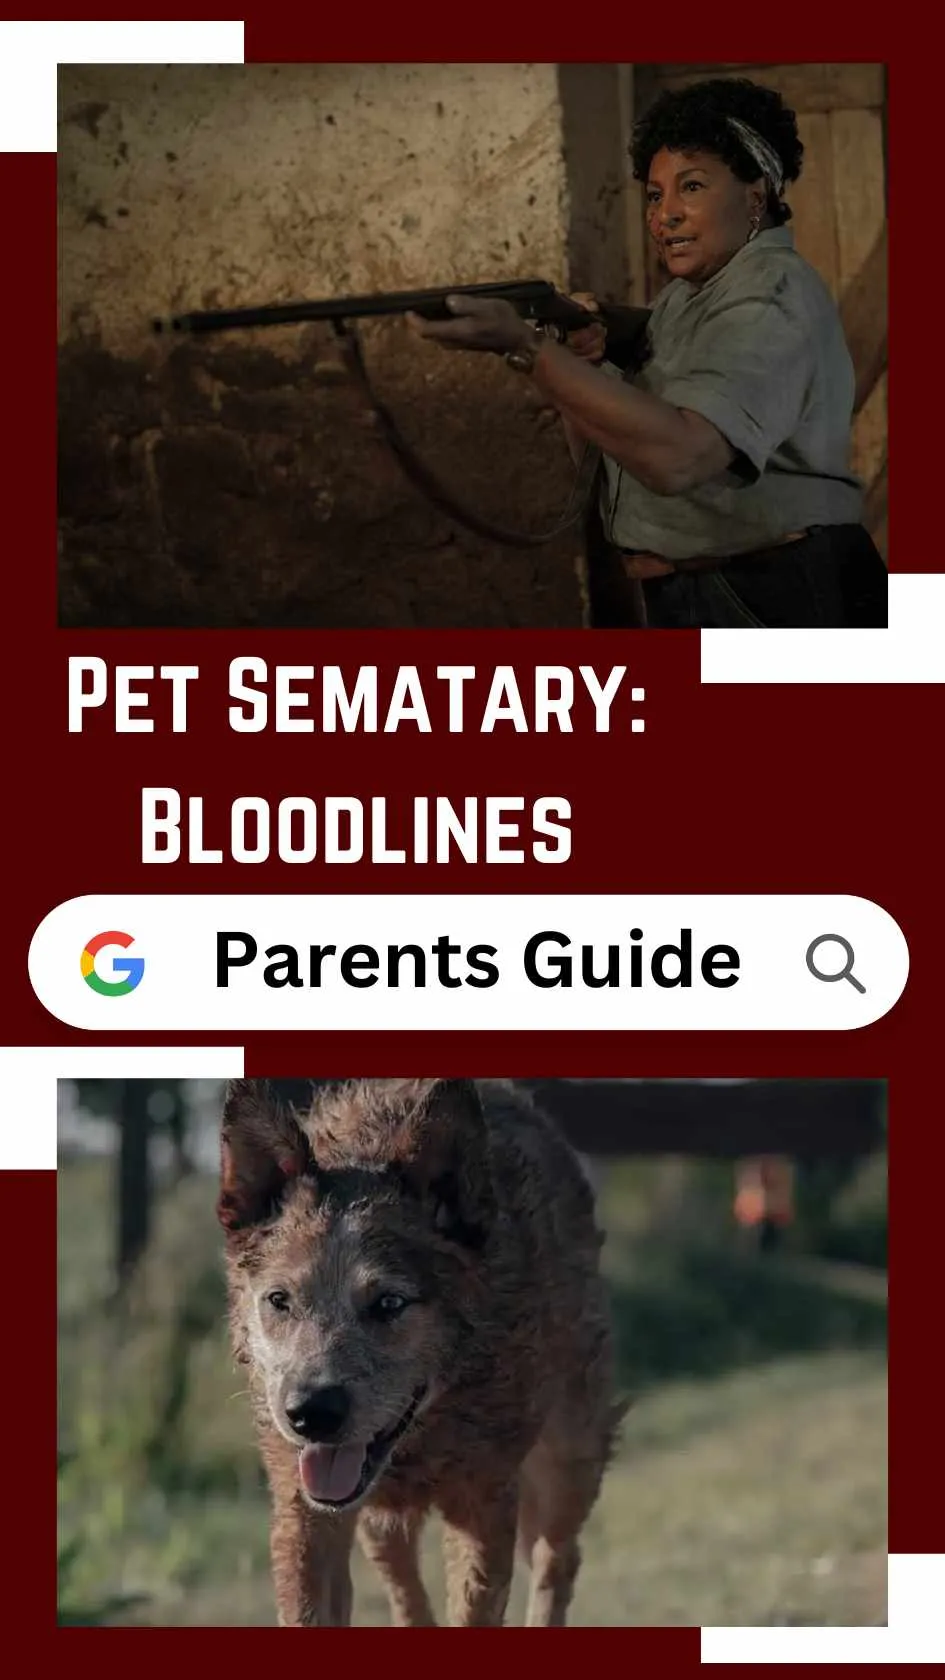 Pet Sematary: Bloodlines Parents Guide